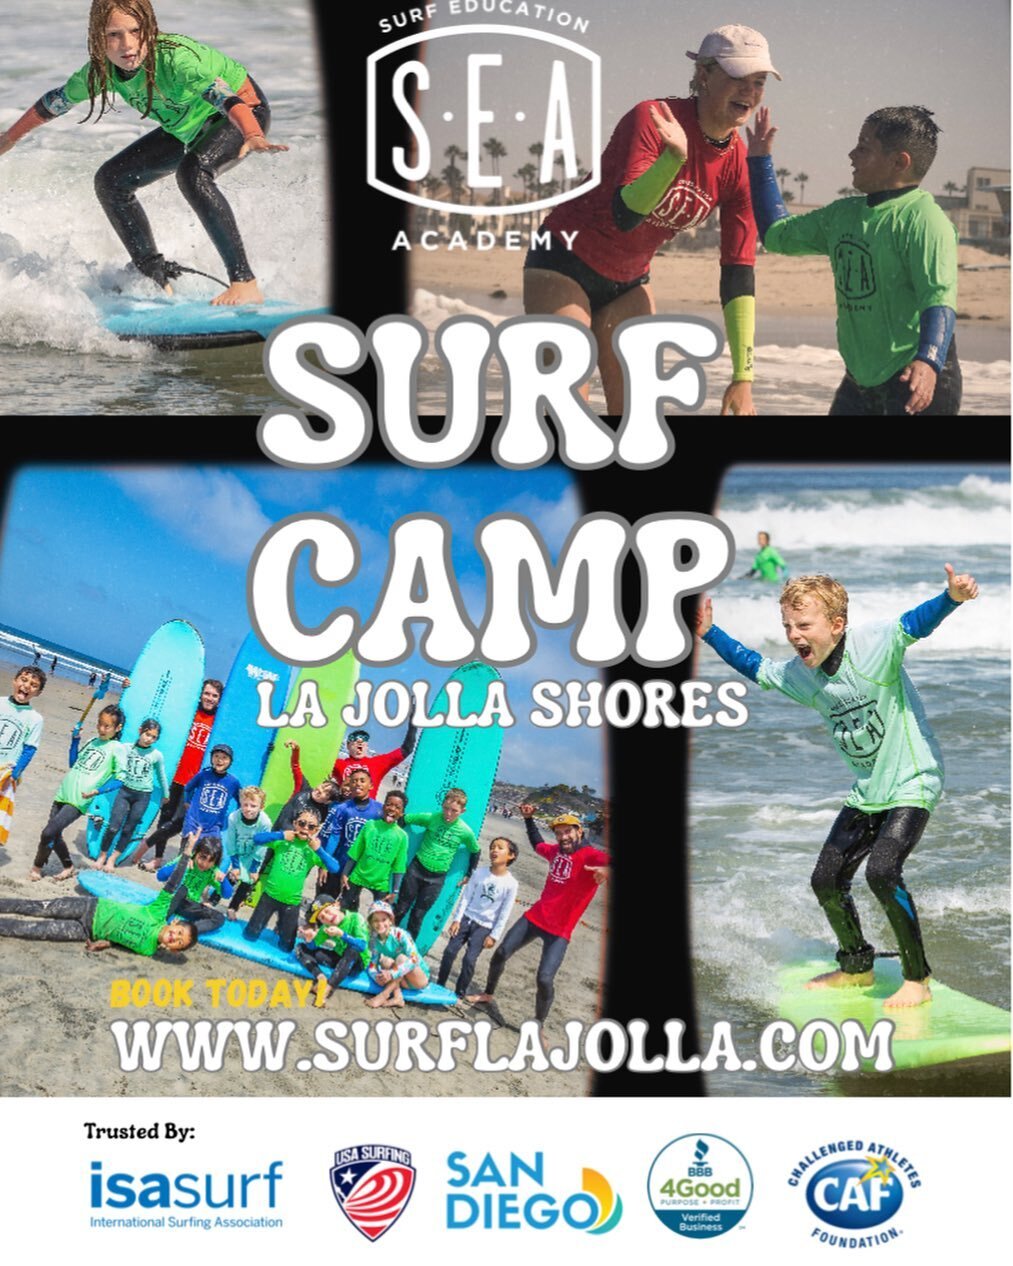 This summer is going to be radical! When they say &ldquo;the good old days&rdquo;, this what they&rsquo;re talking about&hellip; Book your summer surf camp spots today! Link in bio ☝️
#surfcamp #summercamp #summertime #sandiego #camps #learntosurf